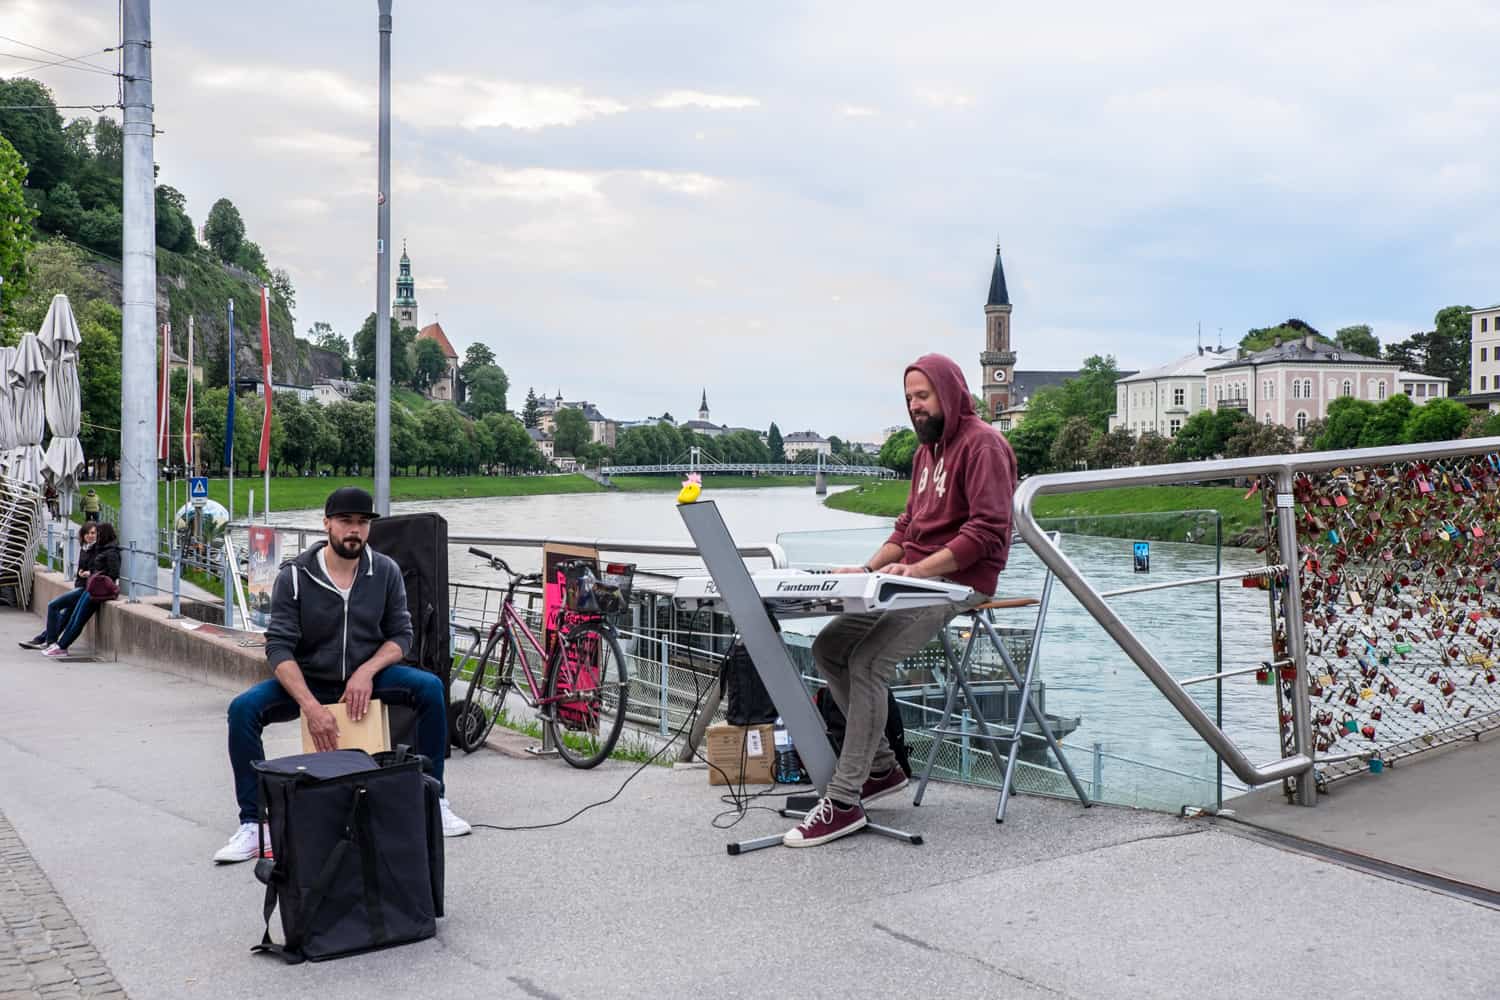 Two bearded men in hoodies - one playing a wood board drum and the other playing a white keyboard, busk next to the padlock covered river bridge in Salzburg. 